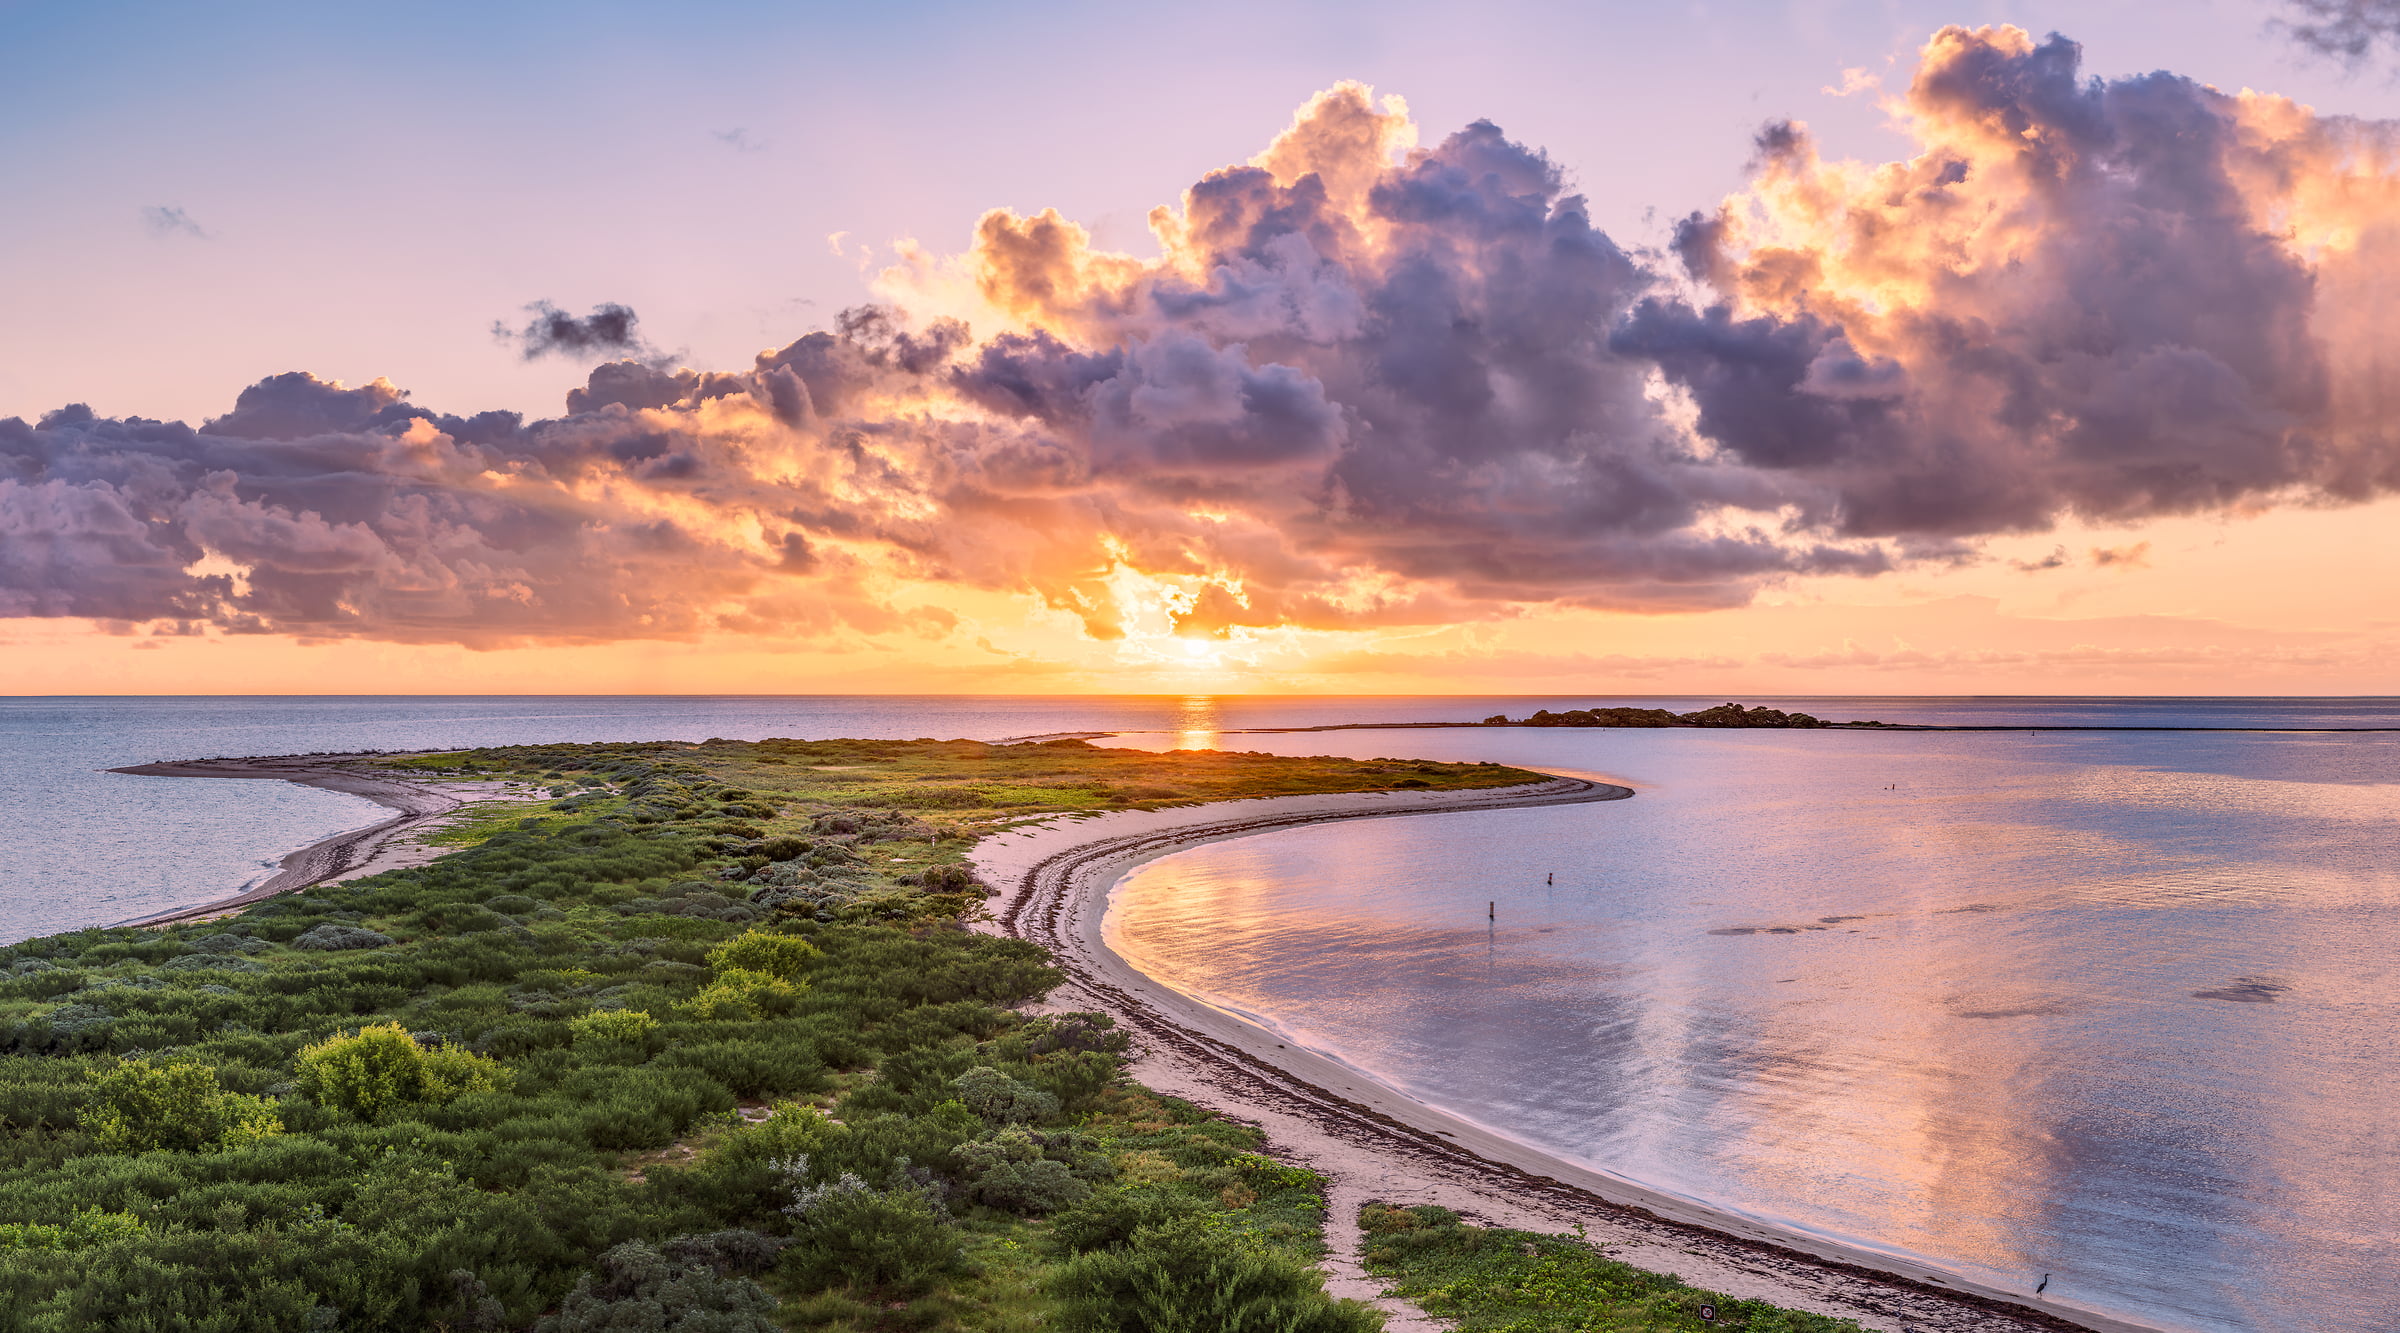 717 megapixels! A very high resolution, large-format VAST photo print of sunset over the Atlantic Ocean in Dry Tortugas National Park; photograph created by Chris Blake in Florida.